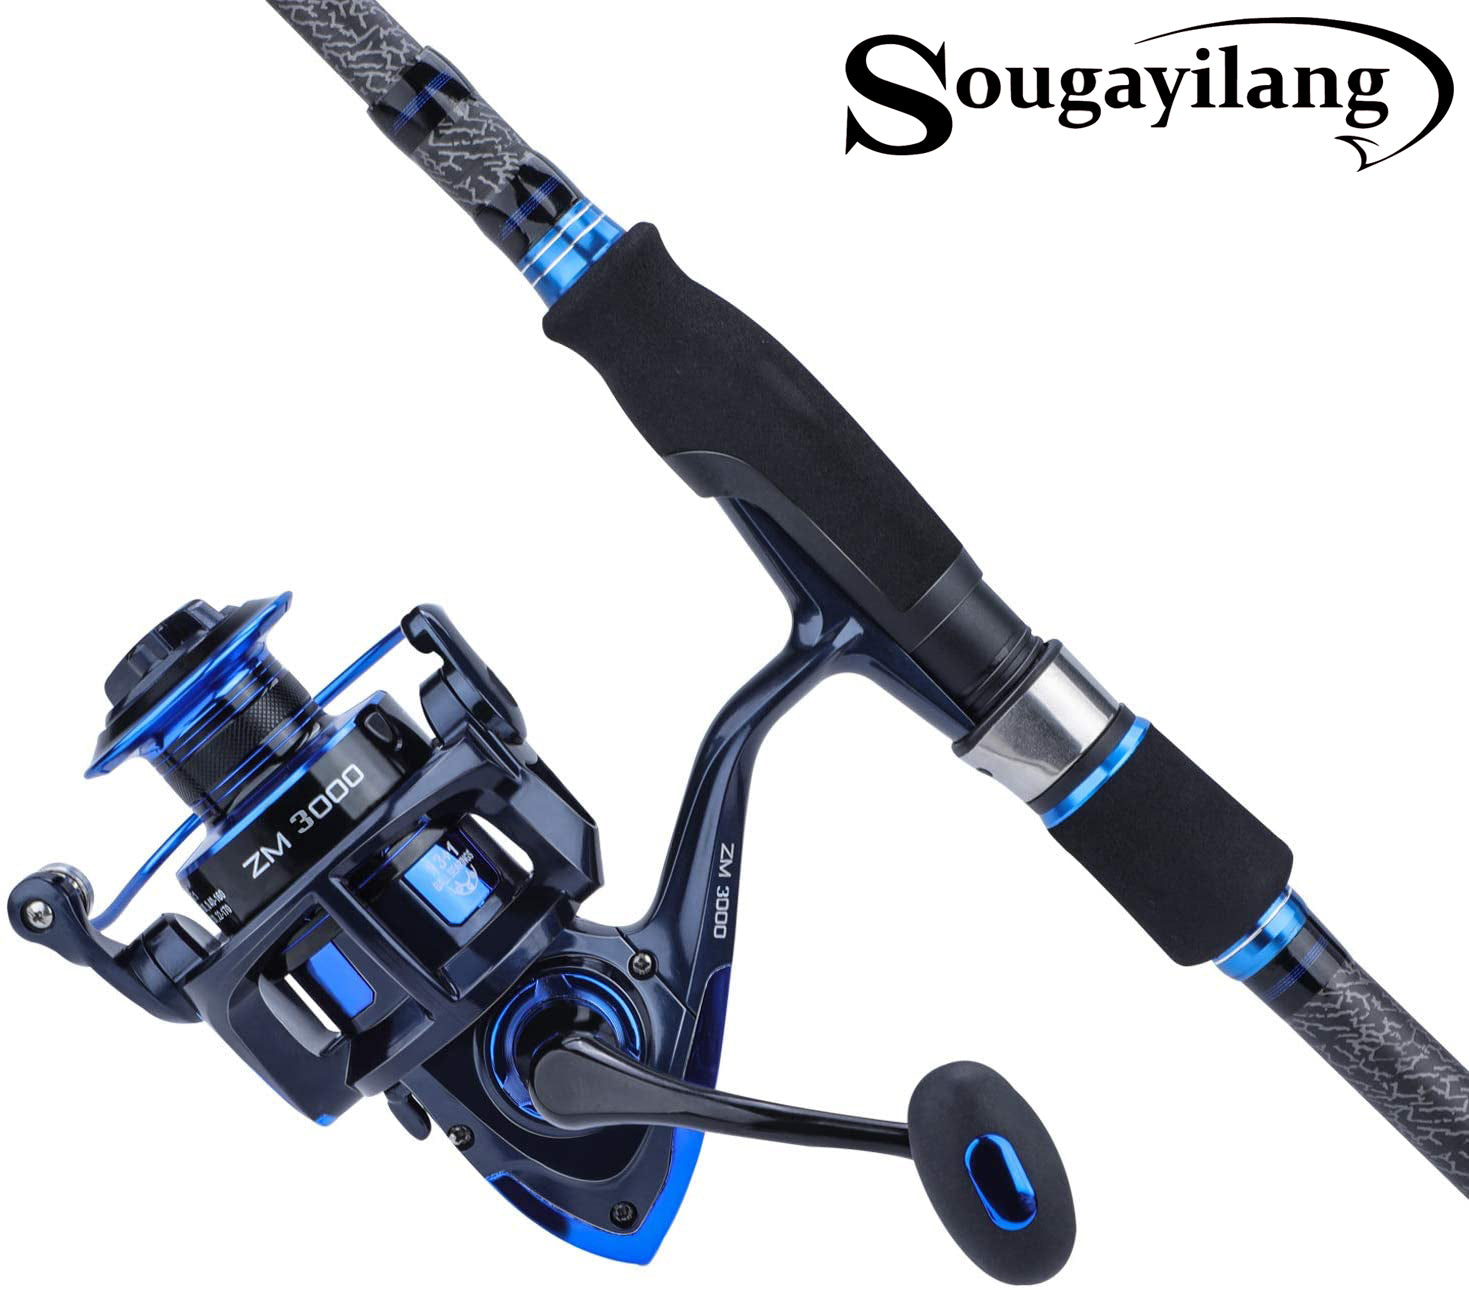 Sougayilang Fishing Rod and Reel Set Portable Telescopic Fishing Rod and Mini  Baitcast Reel Combos for Travel Outdoor Freshwater Fishing